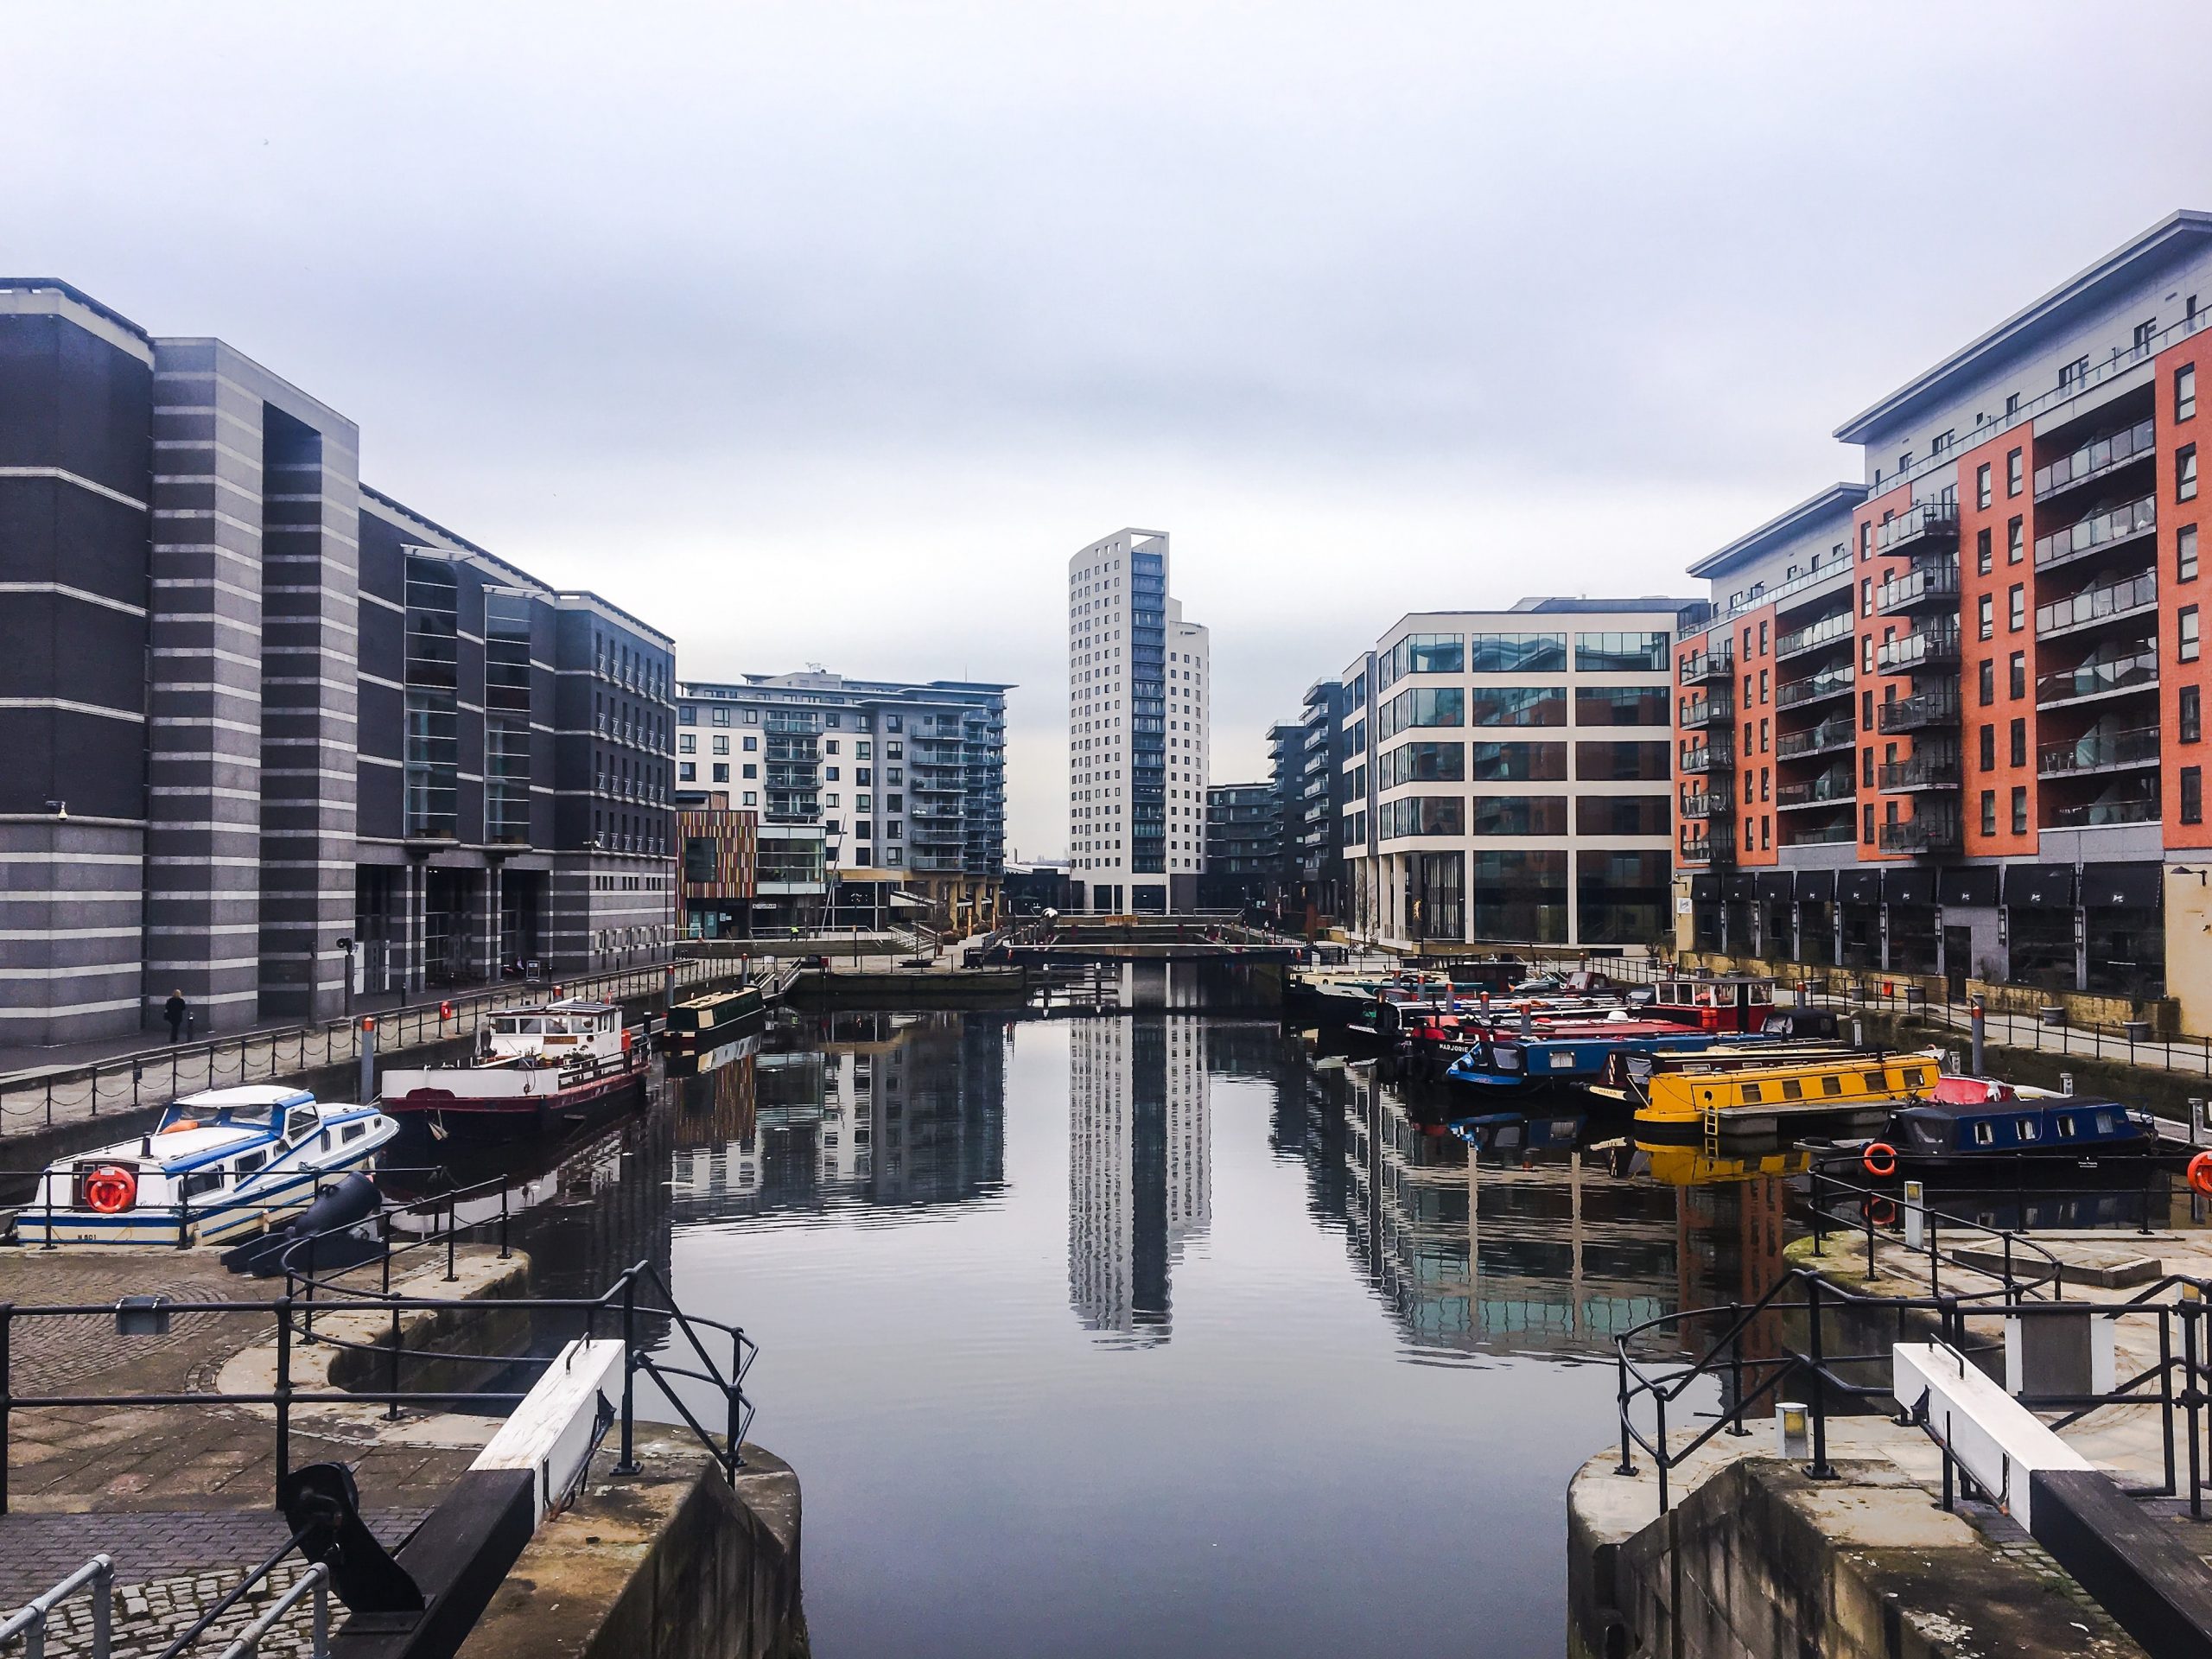 Leeds docks during the day